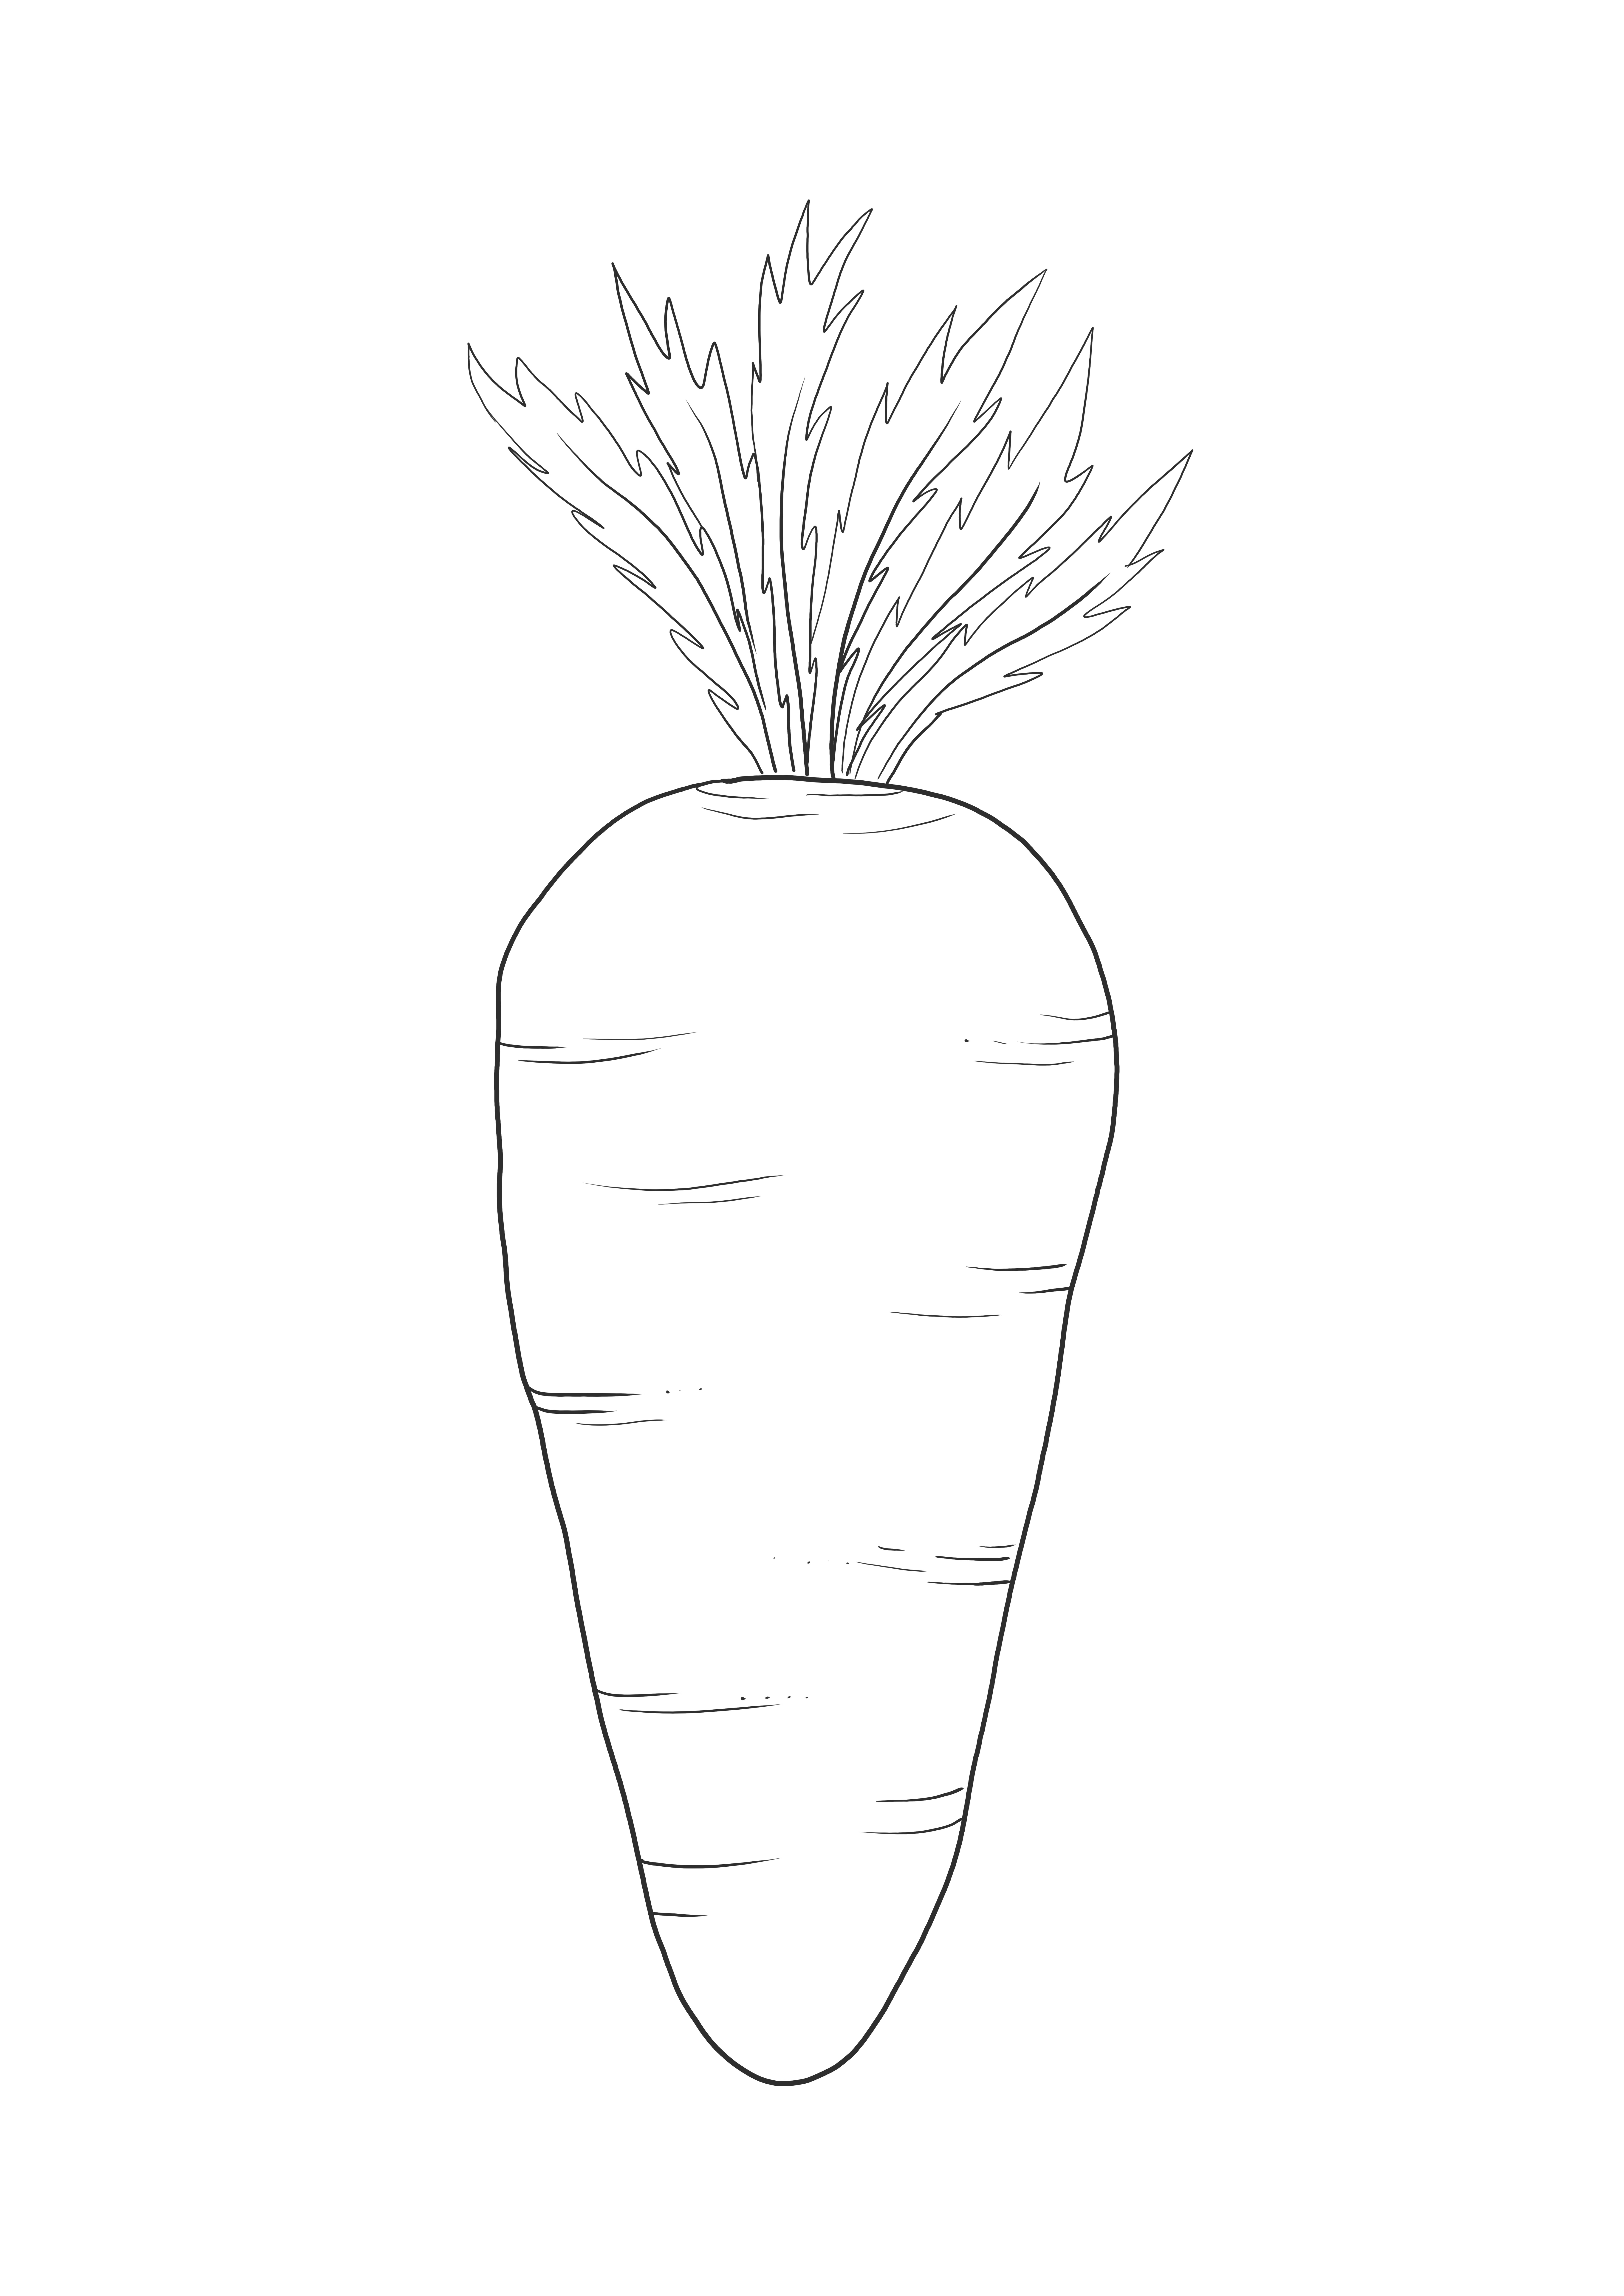 The Carrot-Learning about vegetables through free printing coloring